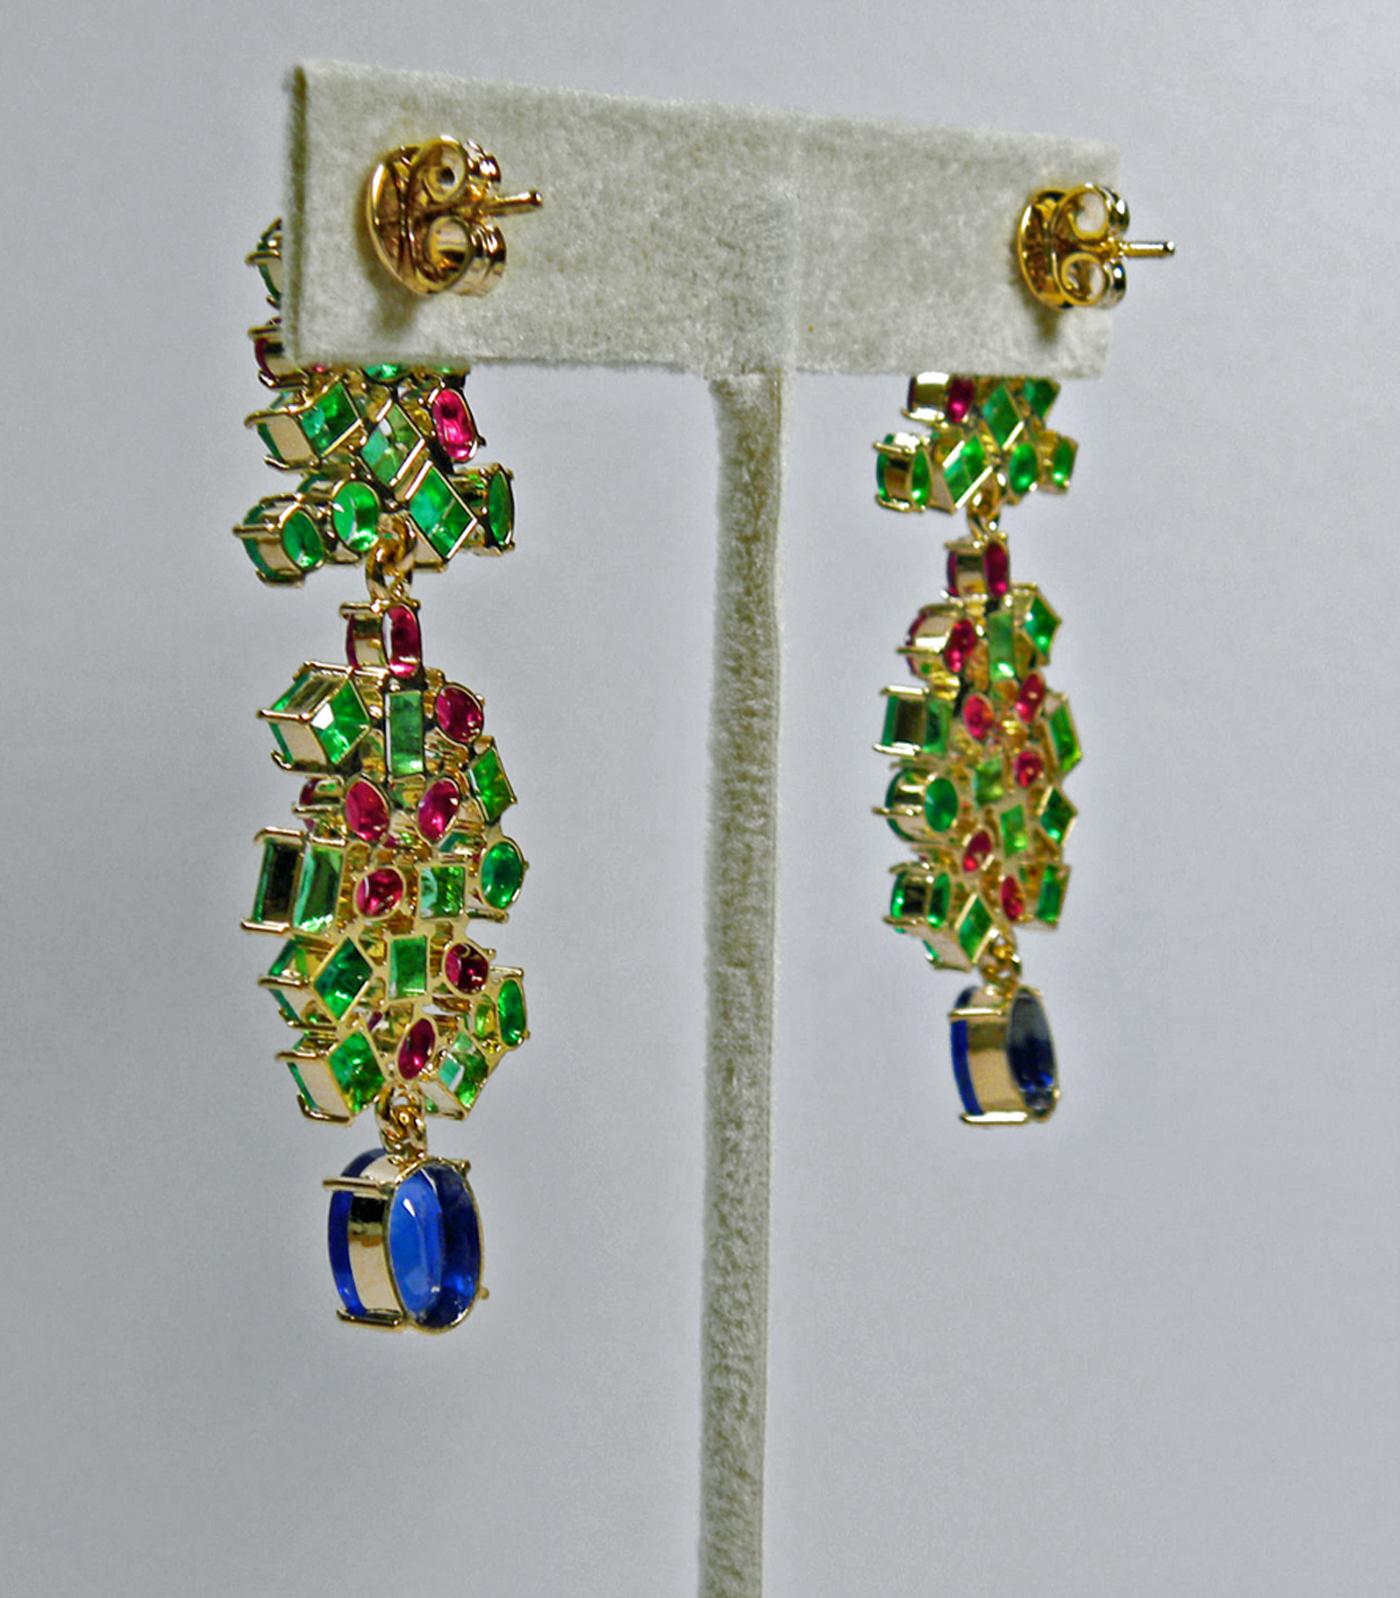  19.36 Carat Sapphire, Emerald, Ruby Chandeliers Earrings One of a Kind  For Sale 1